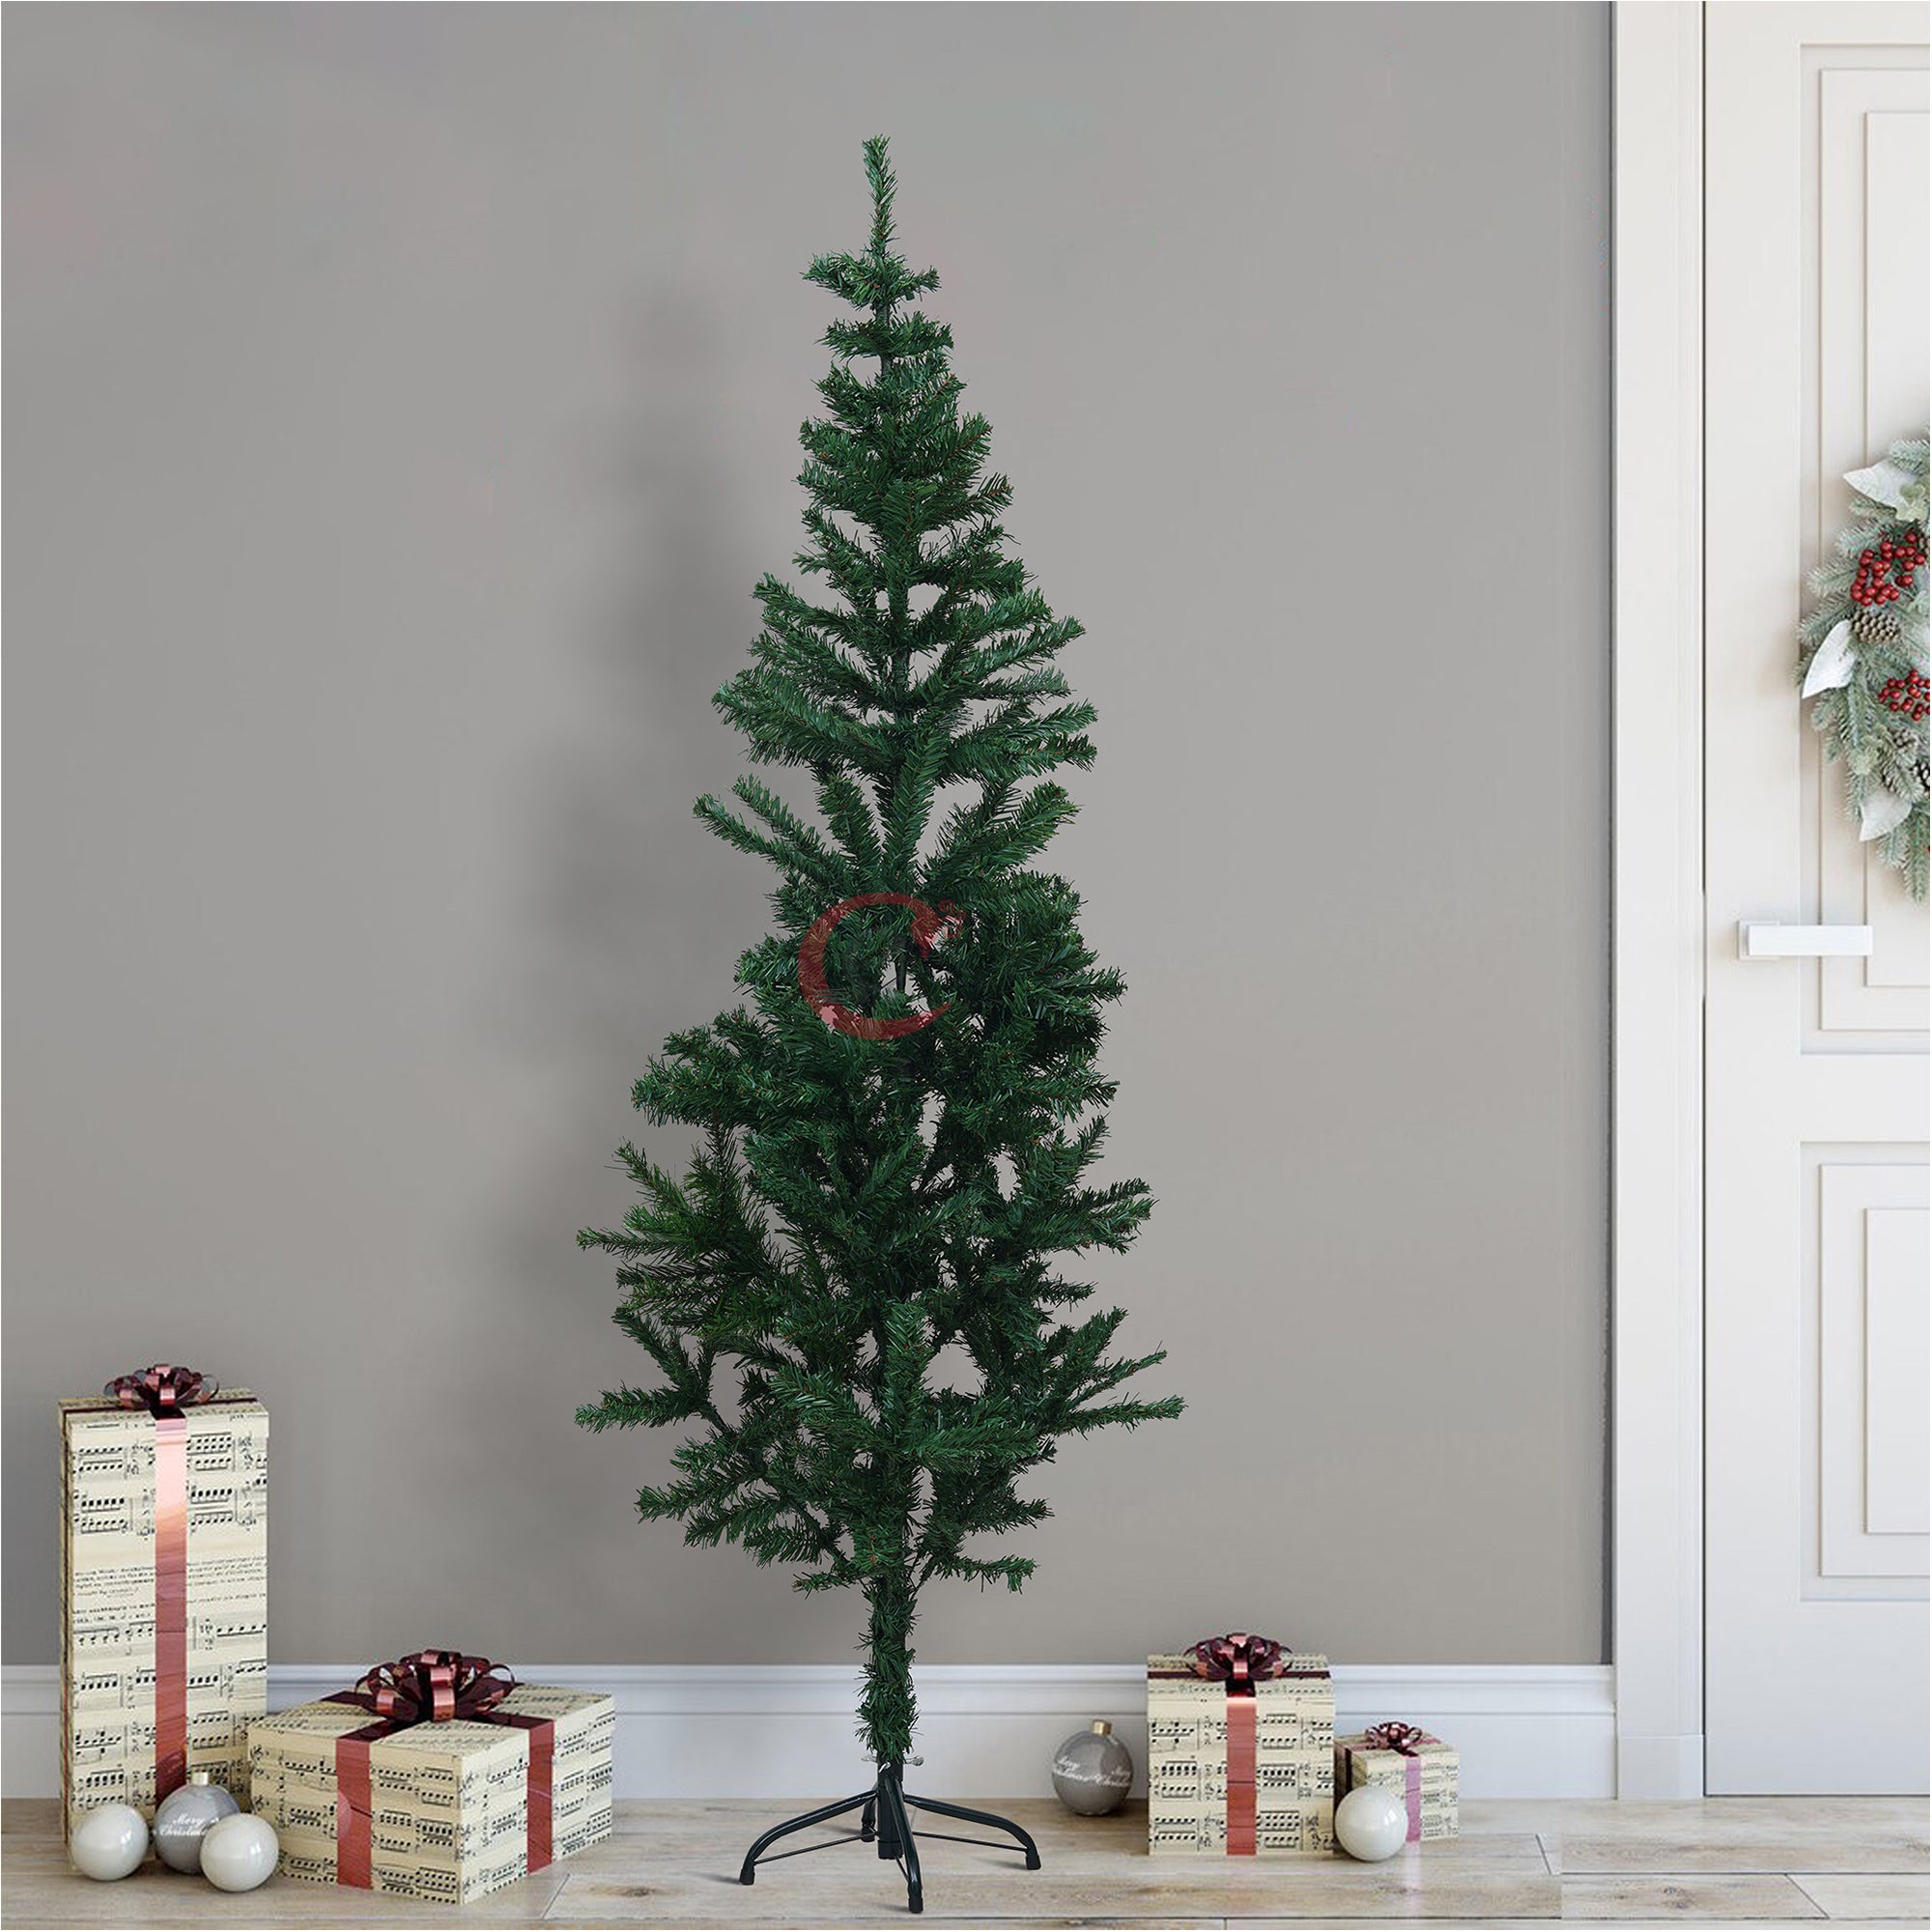 eCraftIndia 5 Feet Green Artificial Christmas Tree Xmas Pine Tree with Metal Stand - Xmas Tree for Indoor, Outdoor, Home, Living Room, Office, Church Decor - Merry Christmas Decoration Item